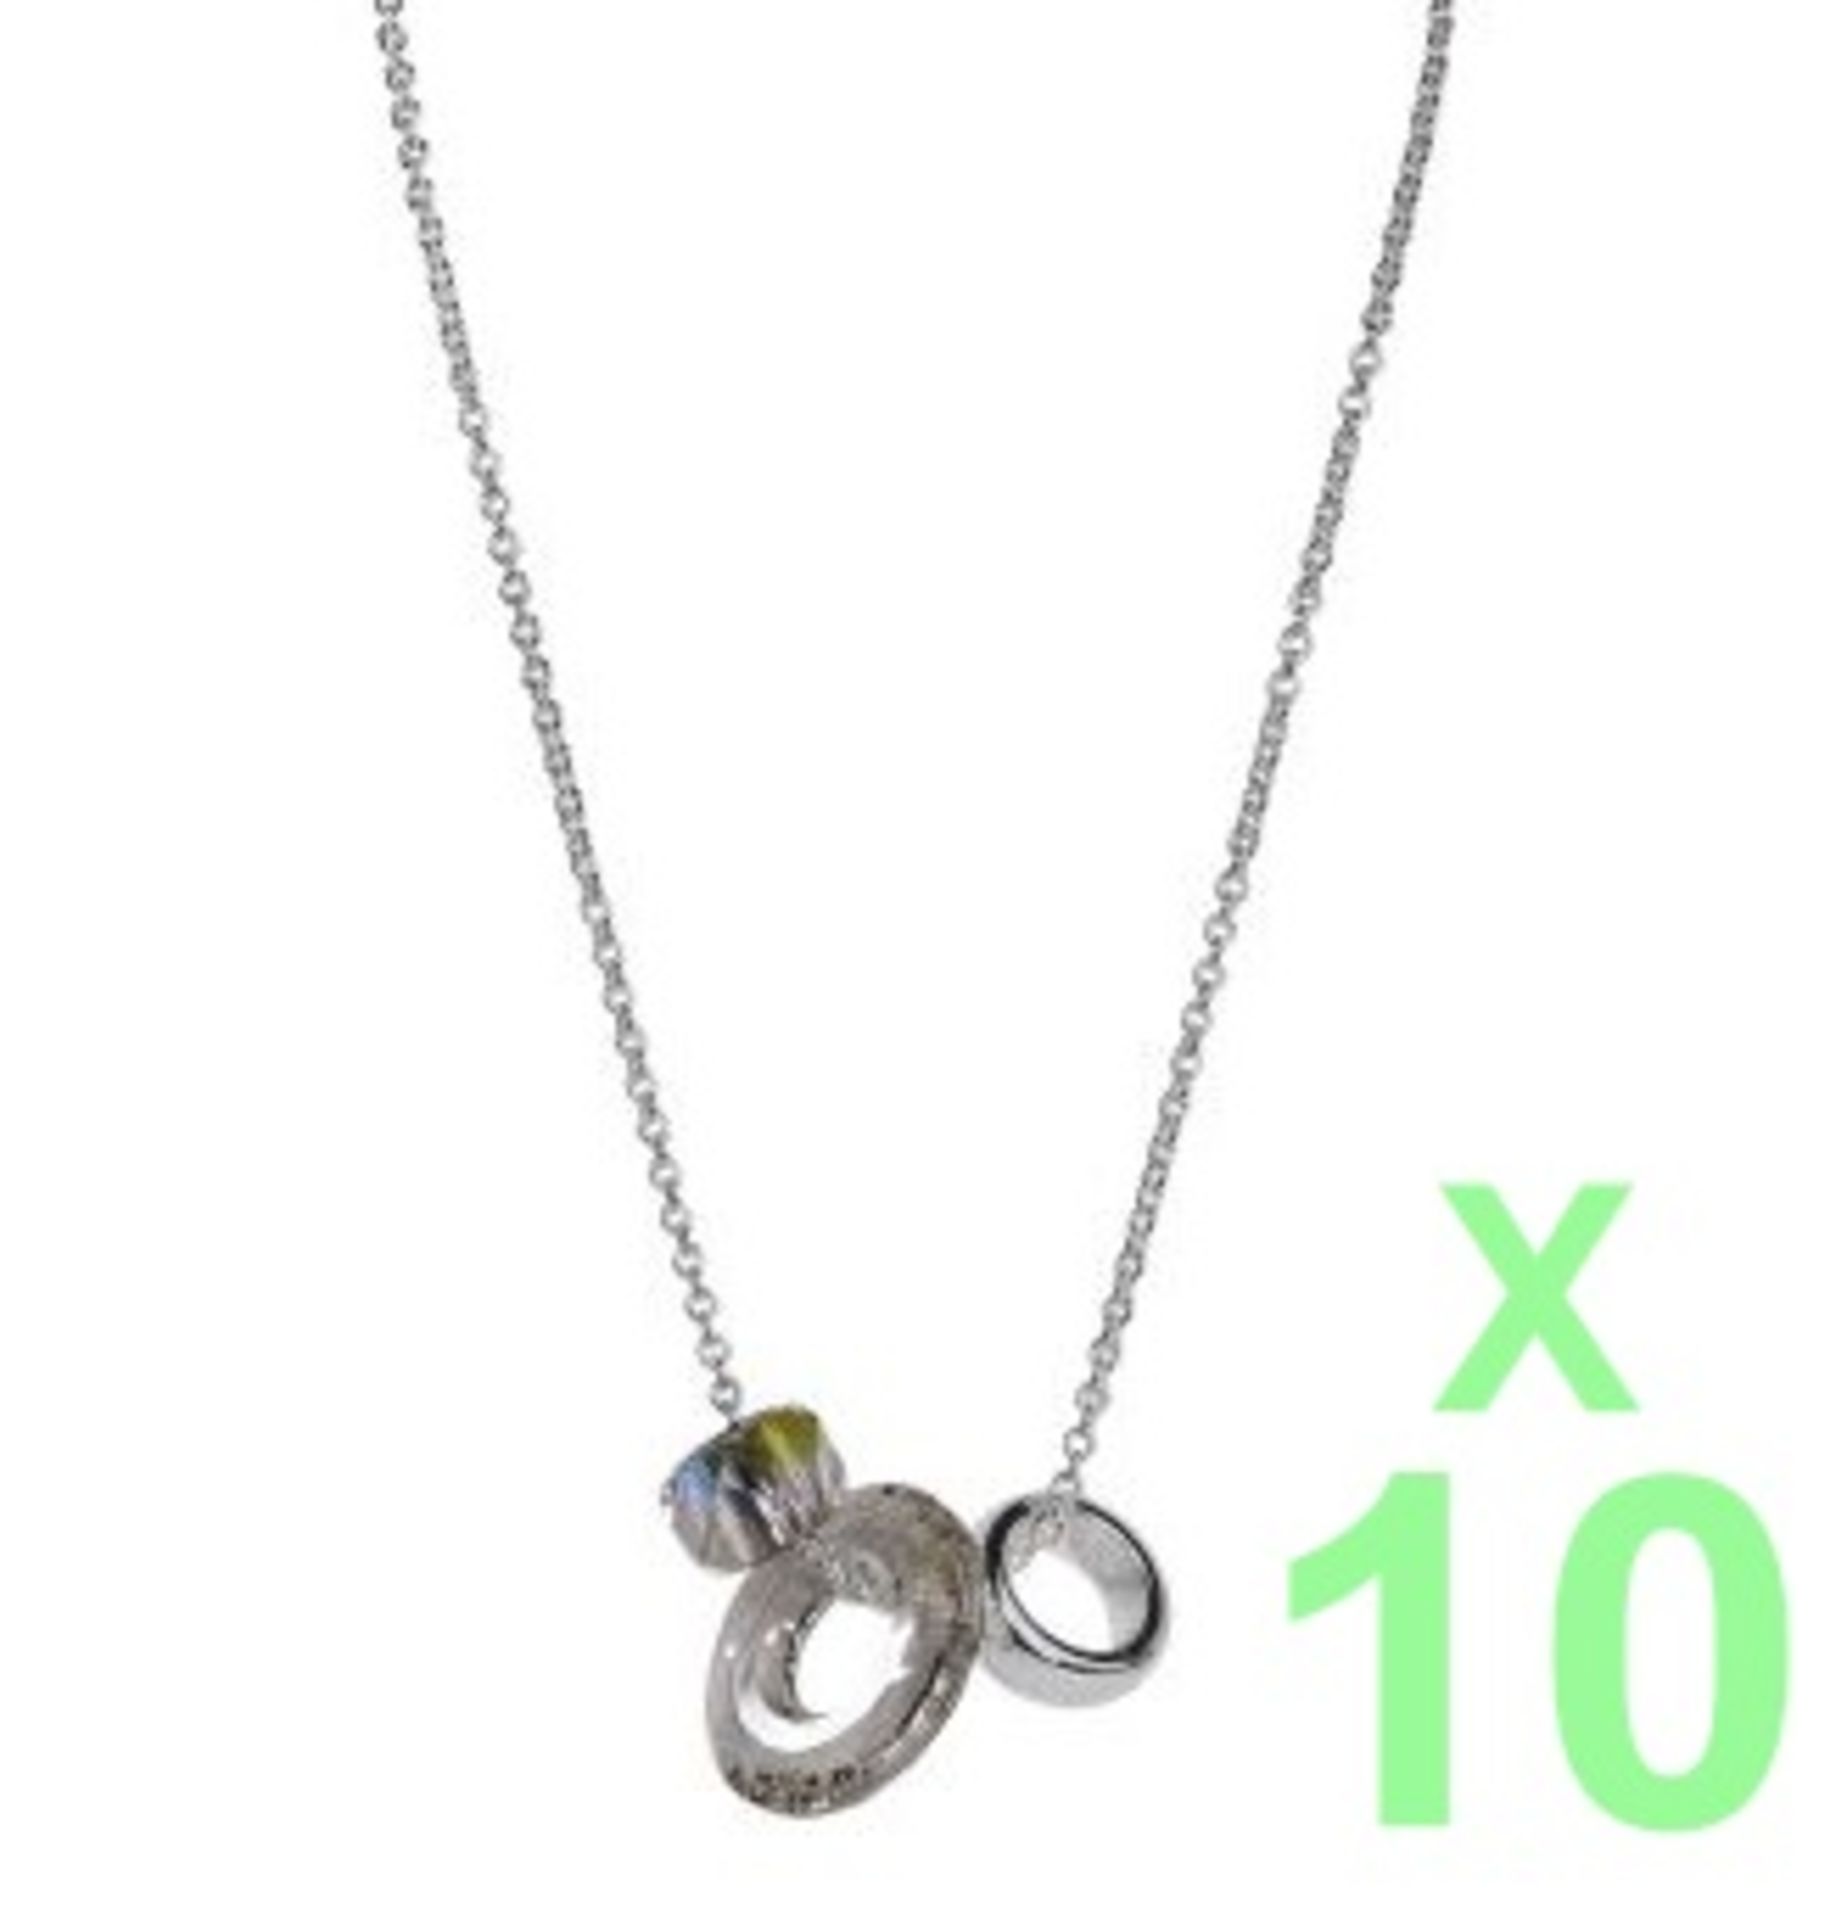 10 x PEARL AND CHARM NECKLACES By ICE London - EGJ-9902 - Features 3 Beautiful Charms Made from